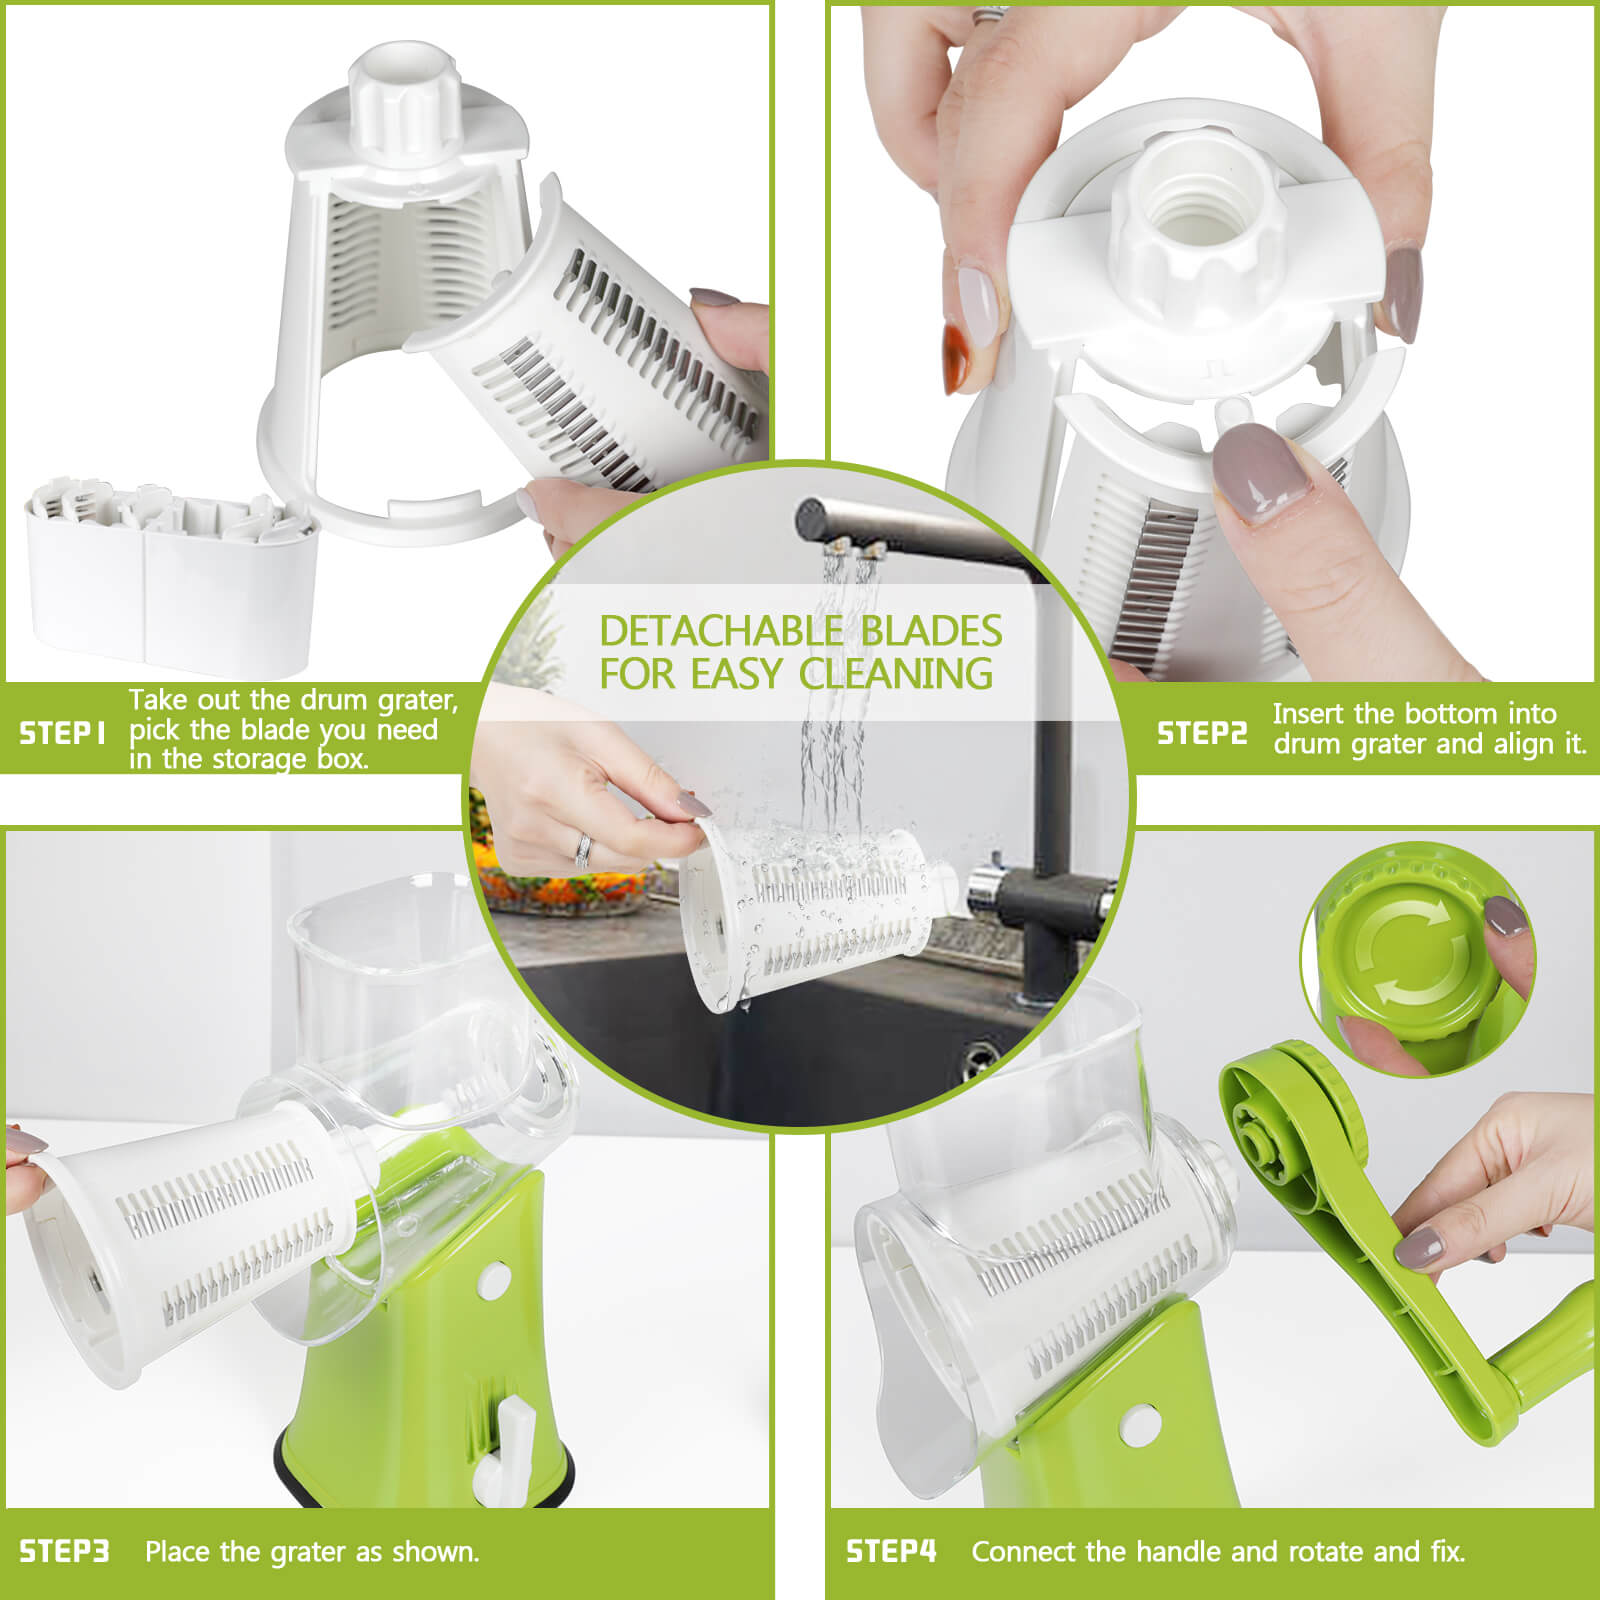 NEW 3-in-1 Spinning/Rotating Mandoline and Countertop Food Slicer and Grater